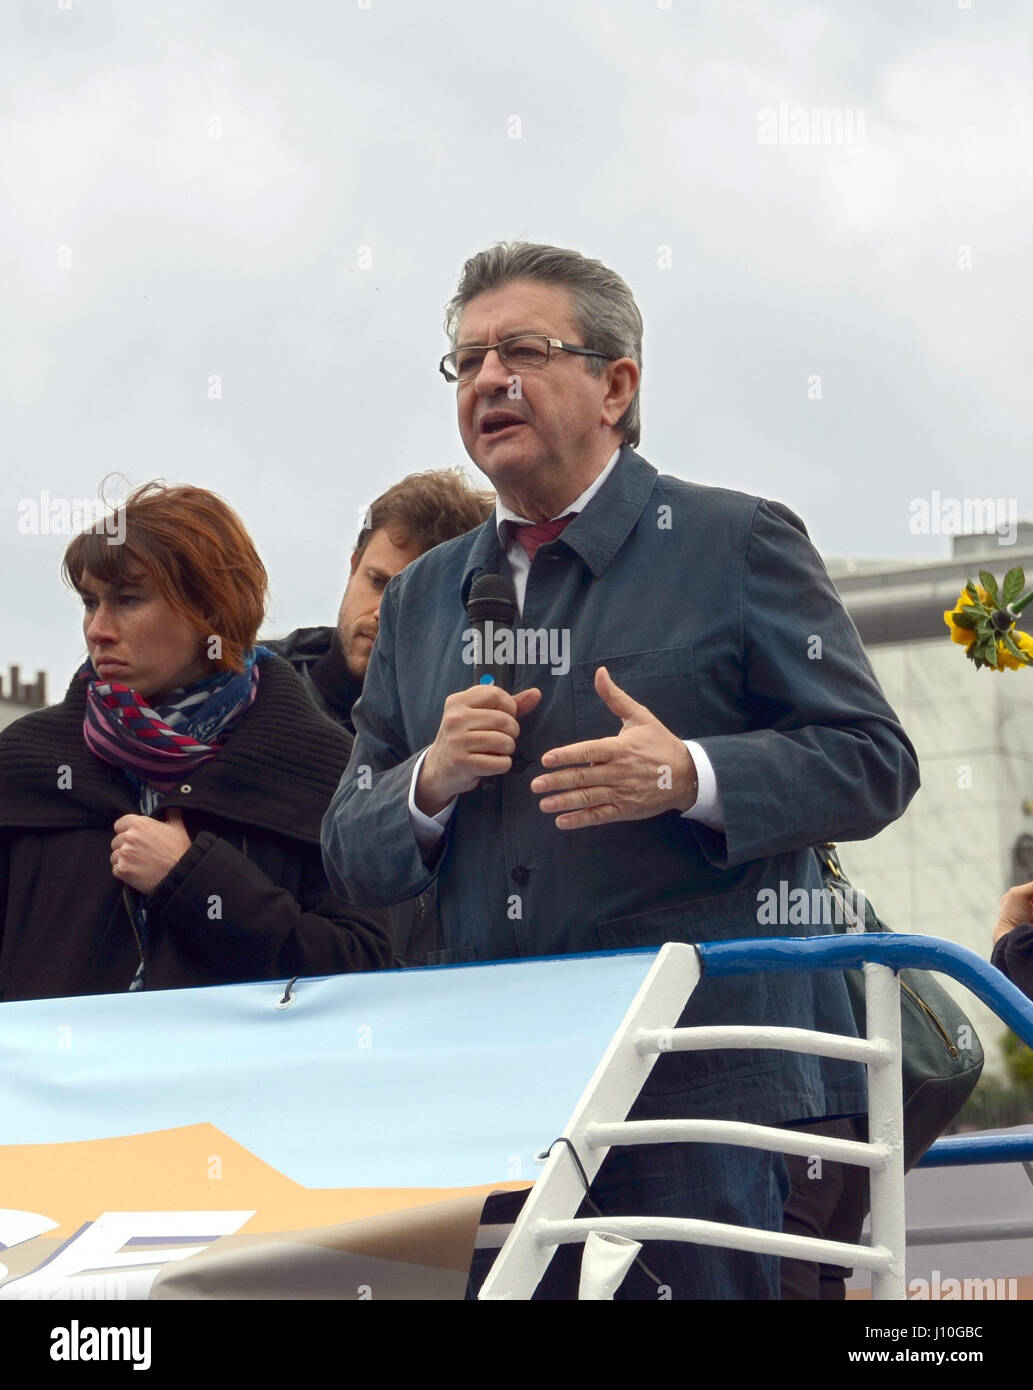 Paris, France. 17th Apr, 2017. The leftwing French presidential candidate Jean-Luc Mélenchon gives a talk on a boat in Paris, France, 17 April 2017. Mélenchon's campaign is currently enjoying an unforseen head of steam. Photo: Sebastian Kunigkeit/dpa/Alamy Live News Stock Photo